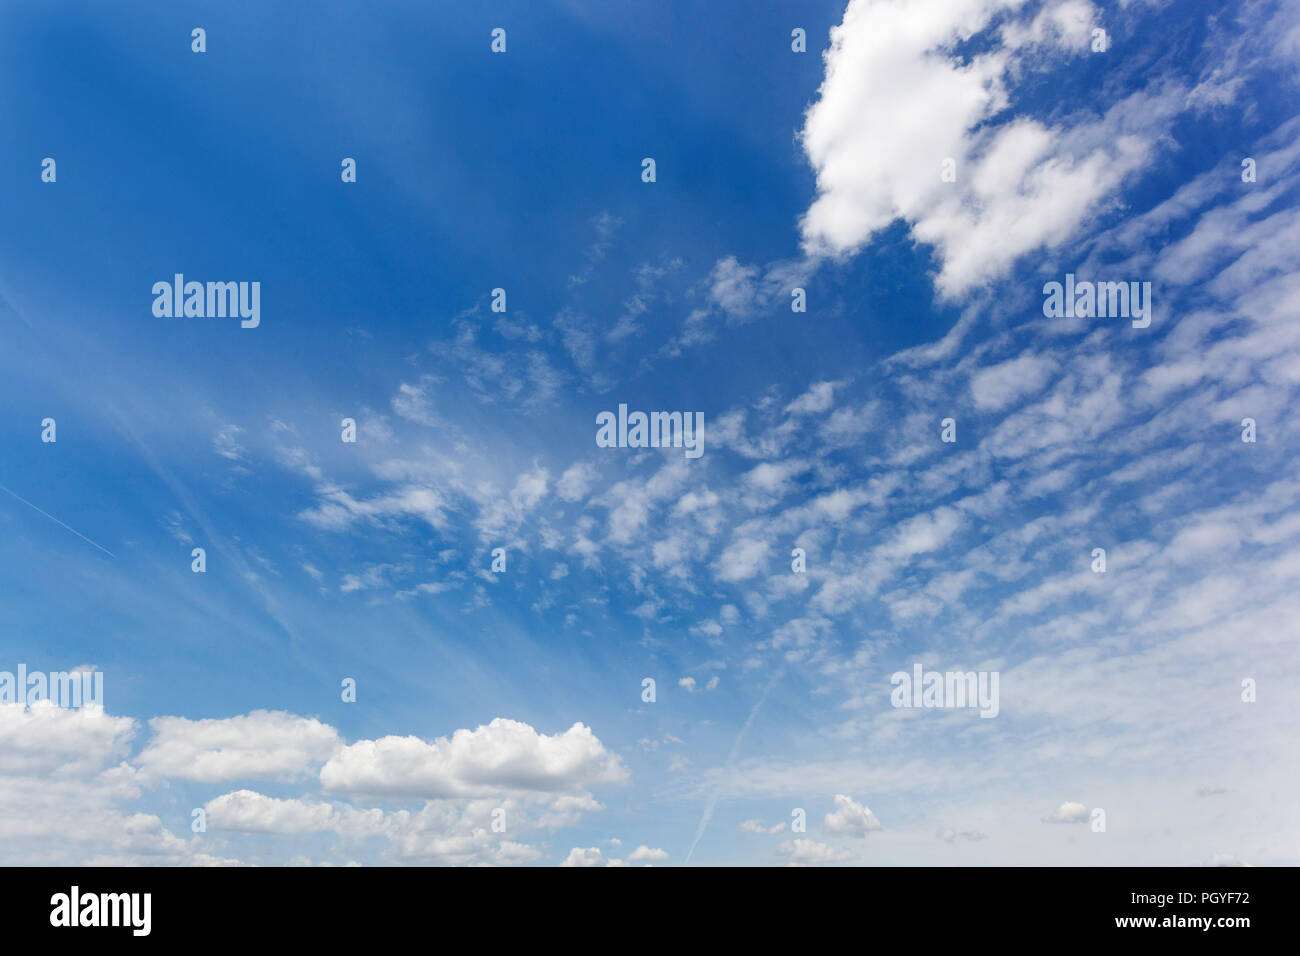 Fluffy white clouds in a blue sky Banque D'Images